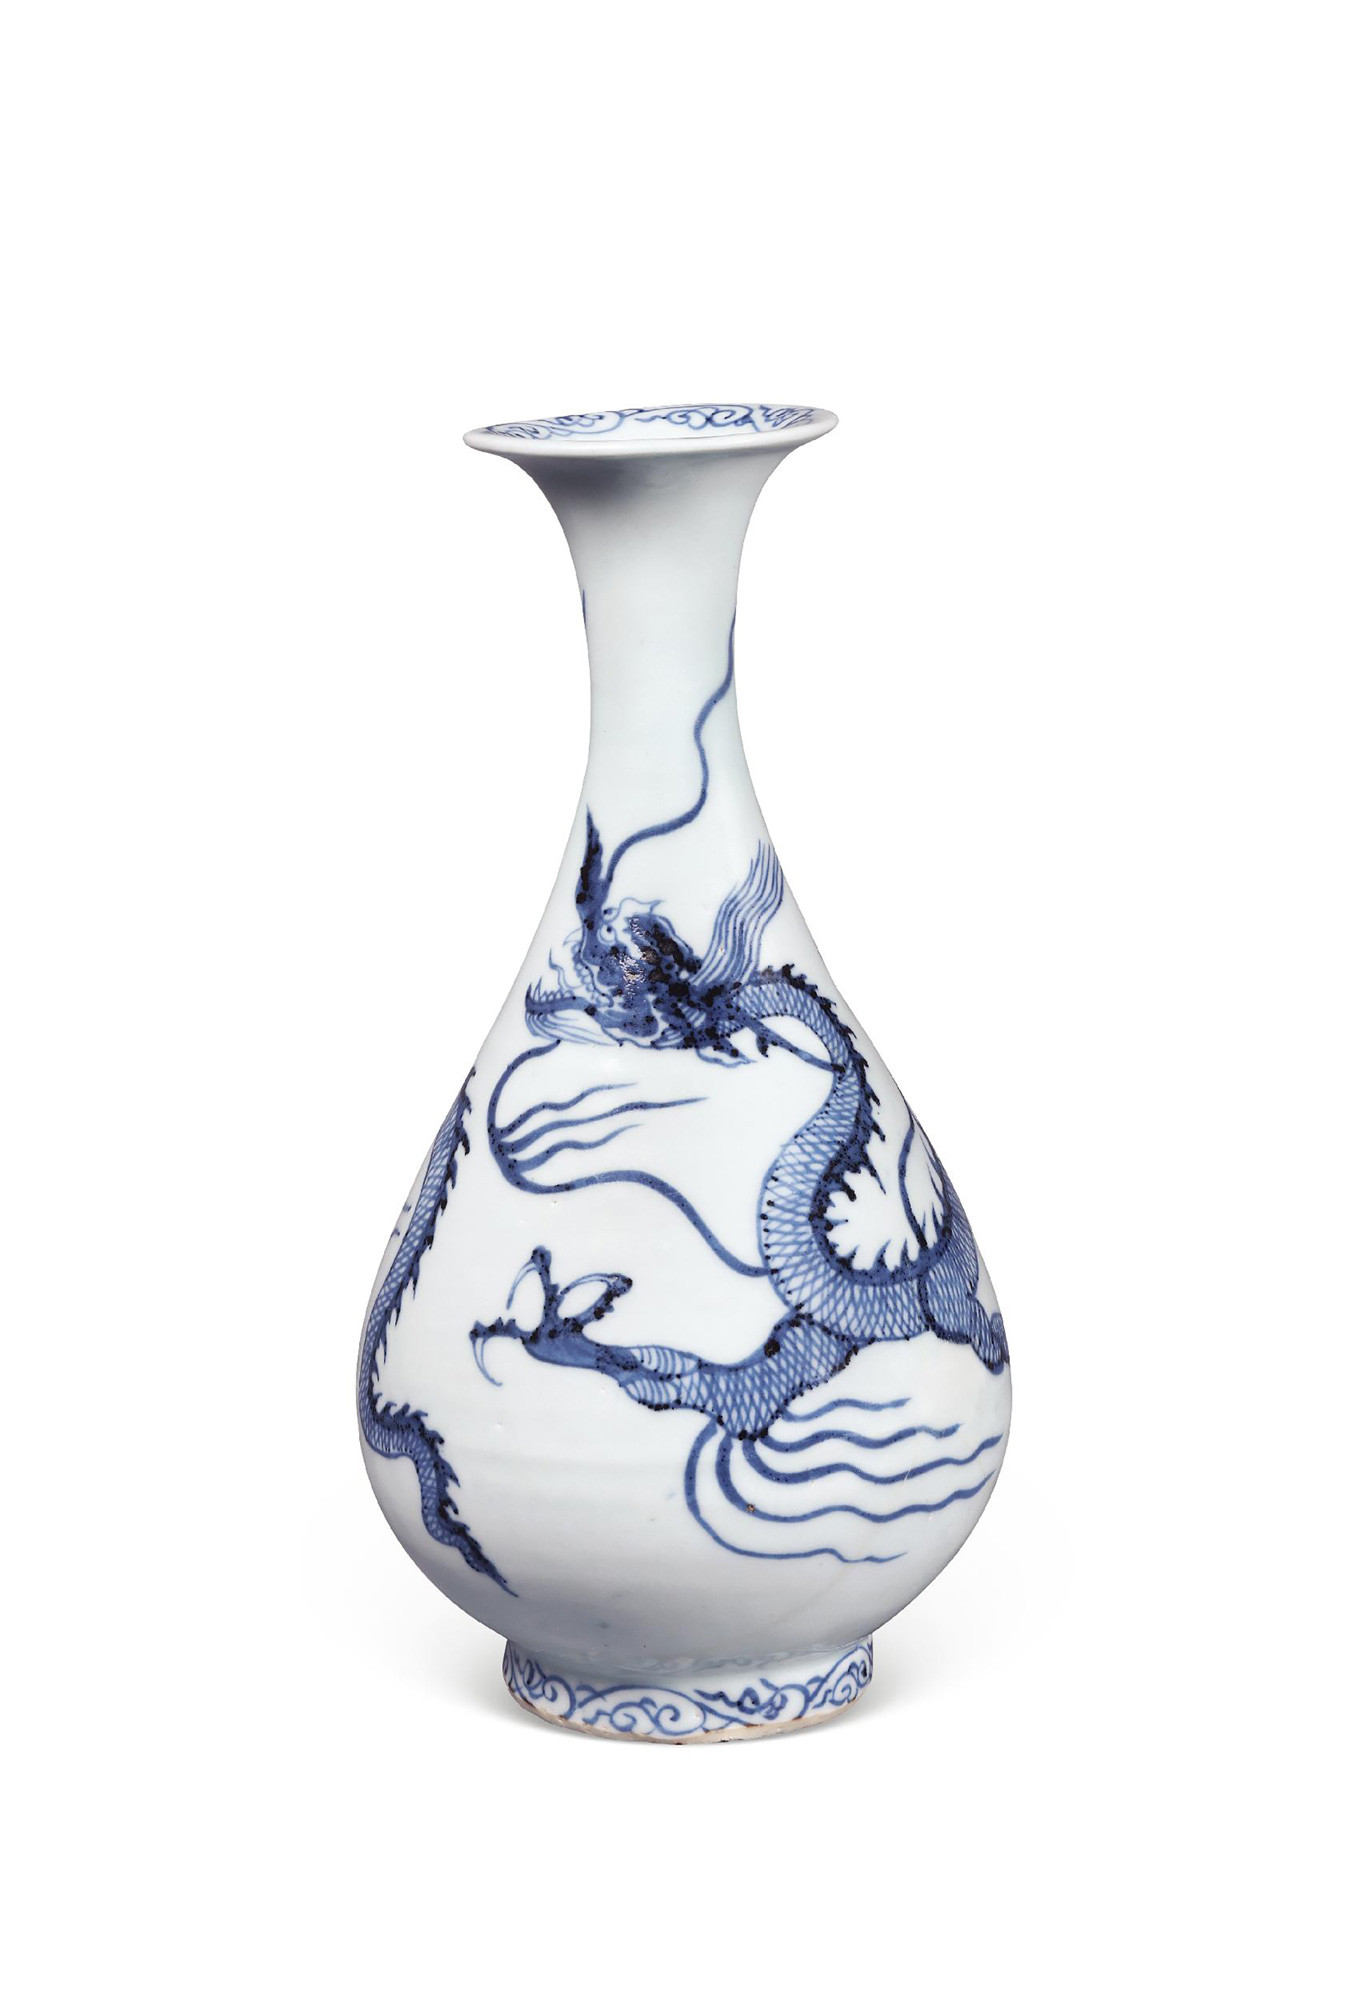 A BLUE AND WHITE PEAR-SHAPED VASE WITH DRAGON DESIGN